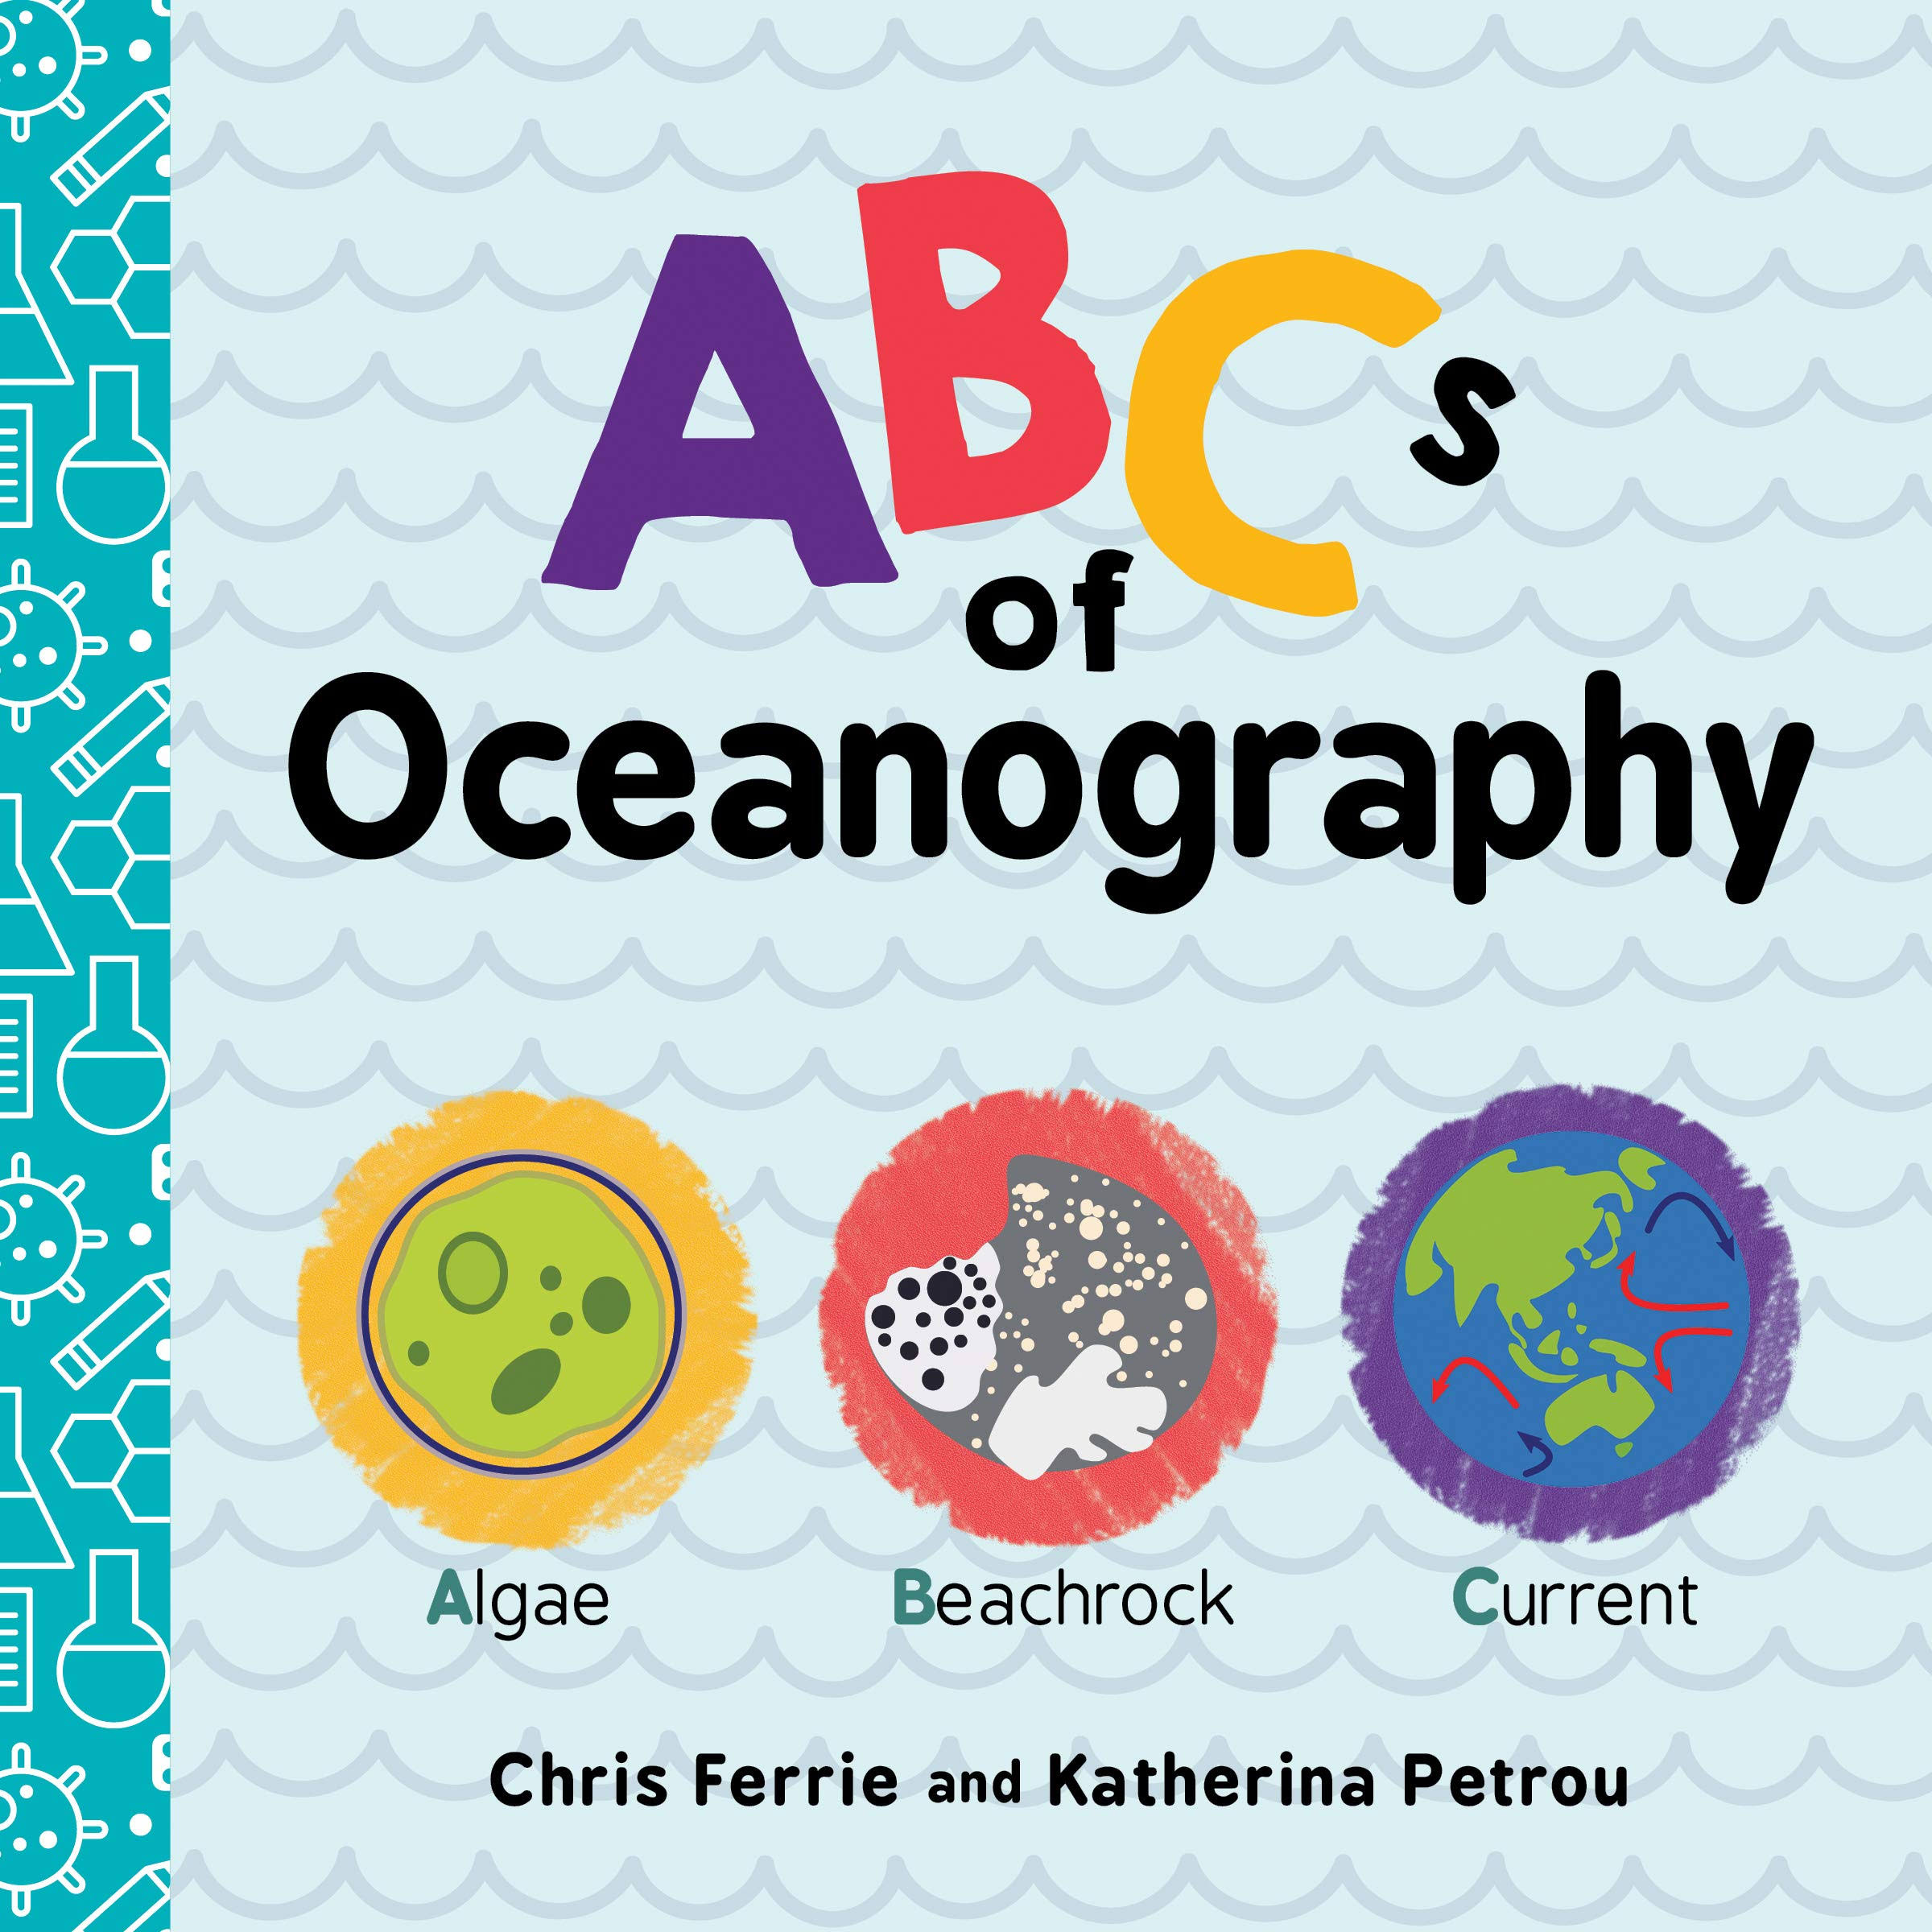 ABCs of Oceanography by Chris Ferrie